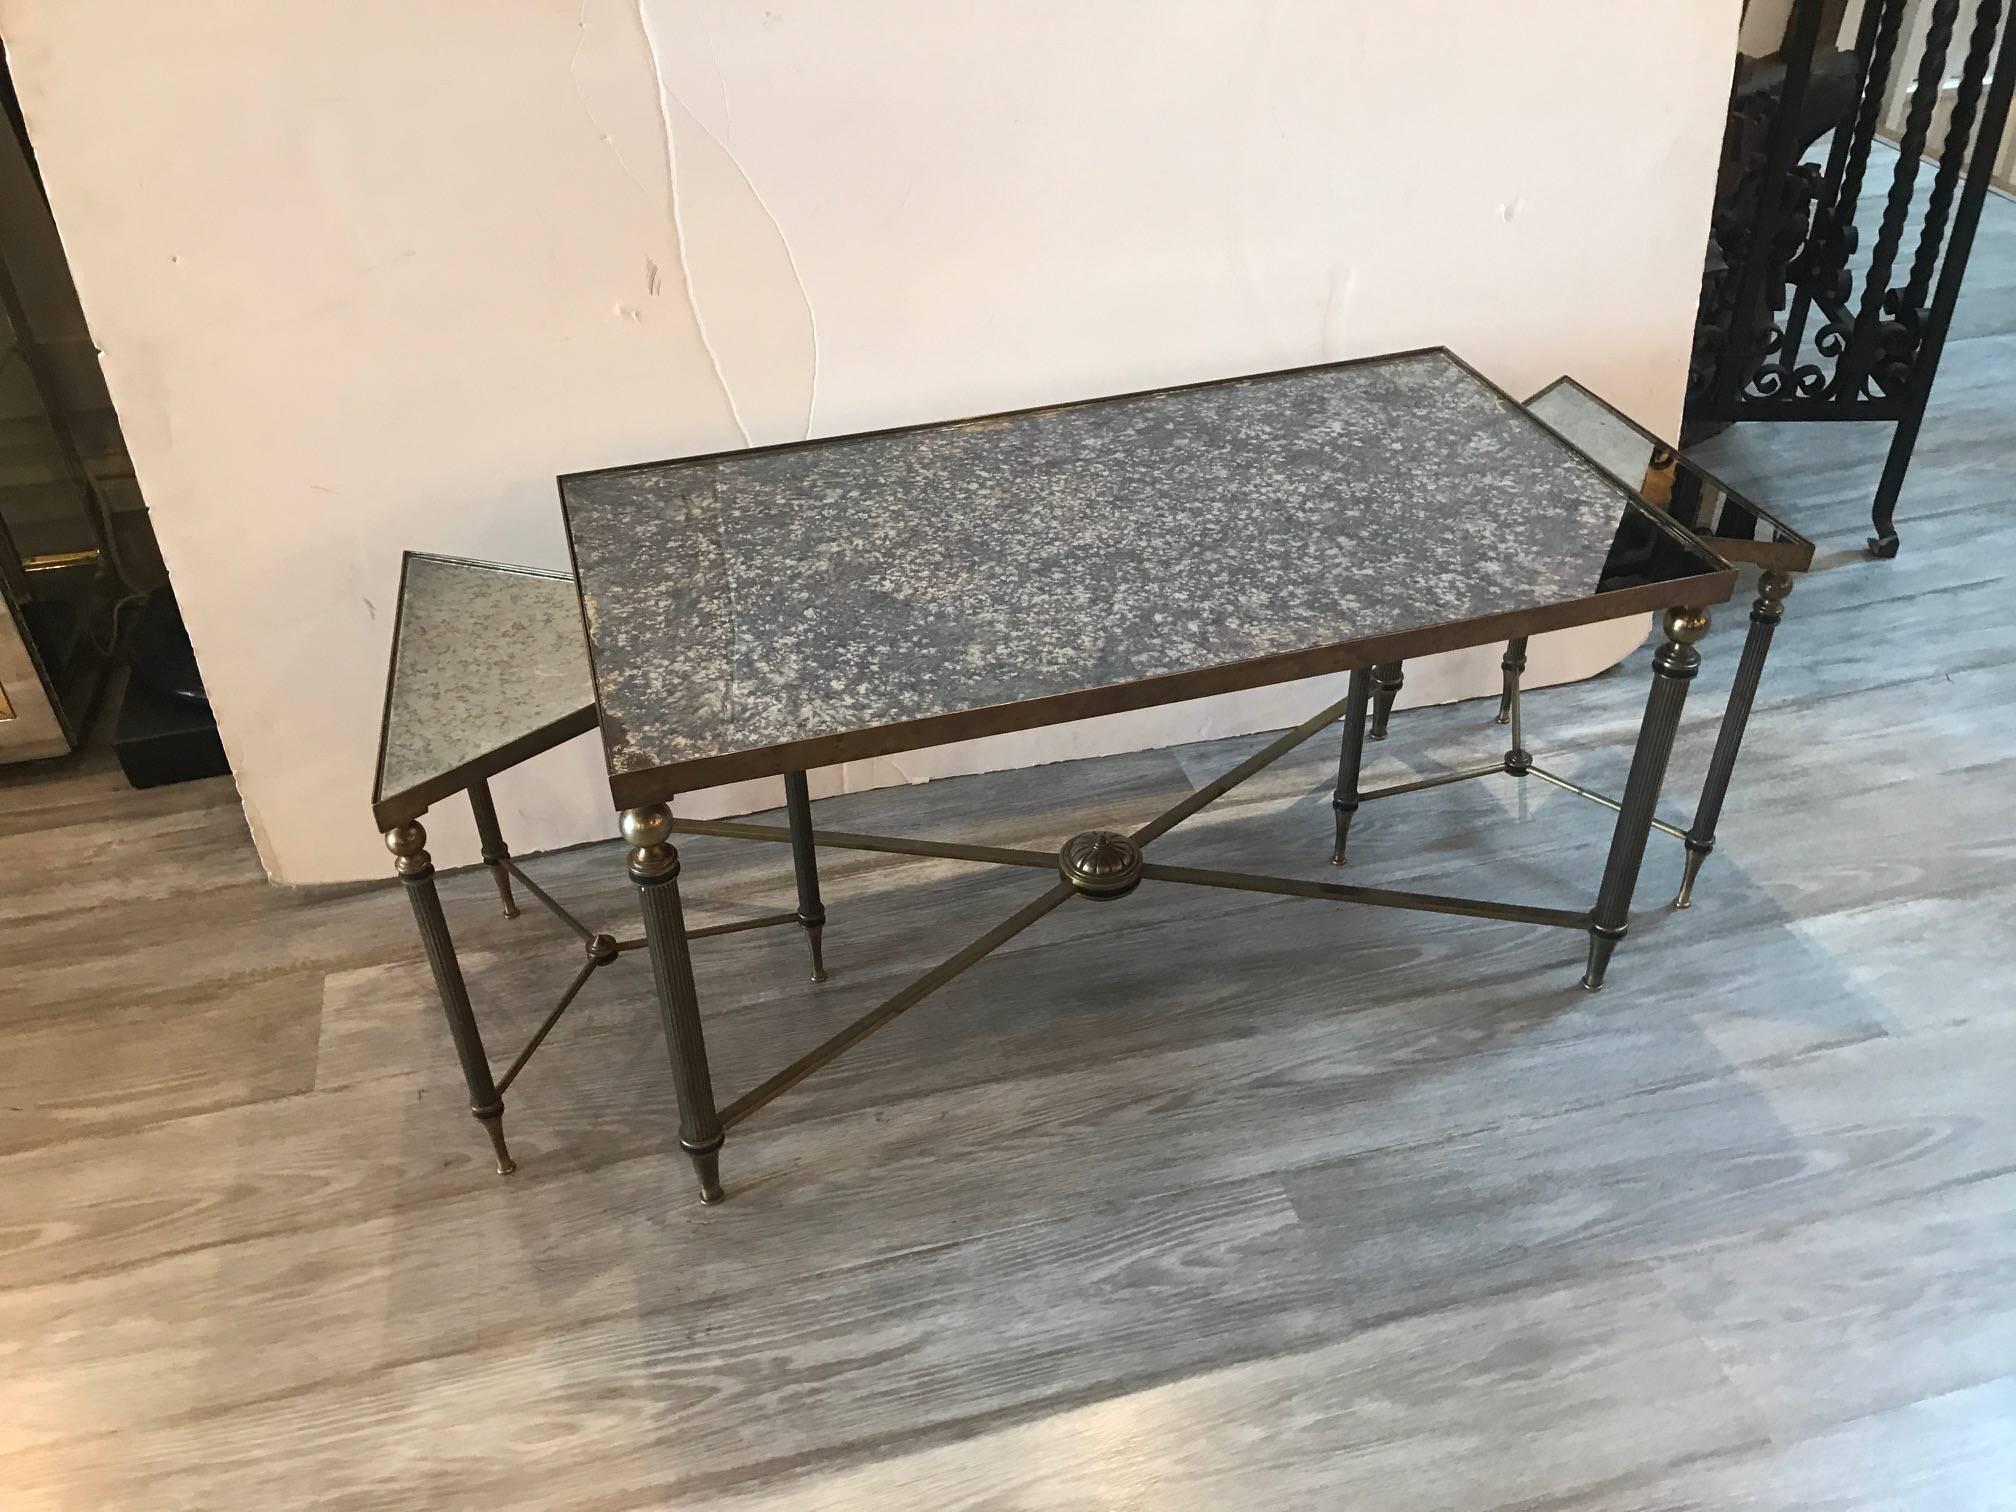 Chic three section distressed mirrored top cocktail table. The larger center rectangle table with two triangular tables that nest into each end. The legs with ribbed lines tapering down to the feet. The mirrors are all original. The rectangular